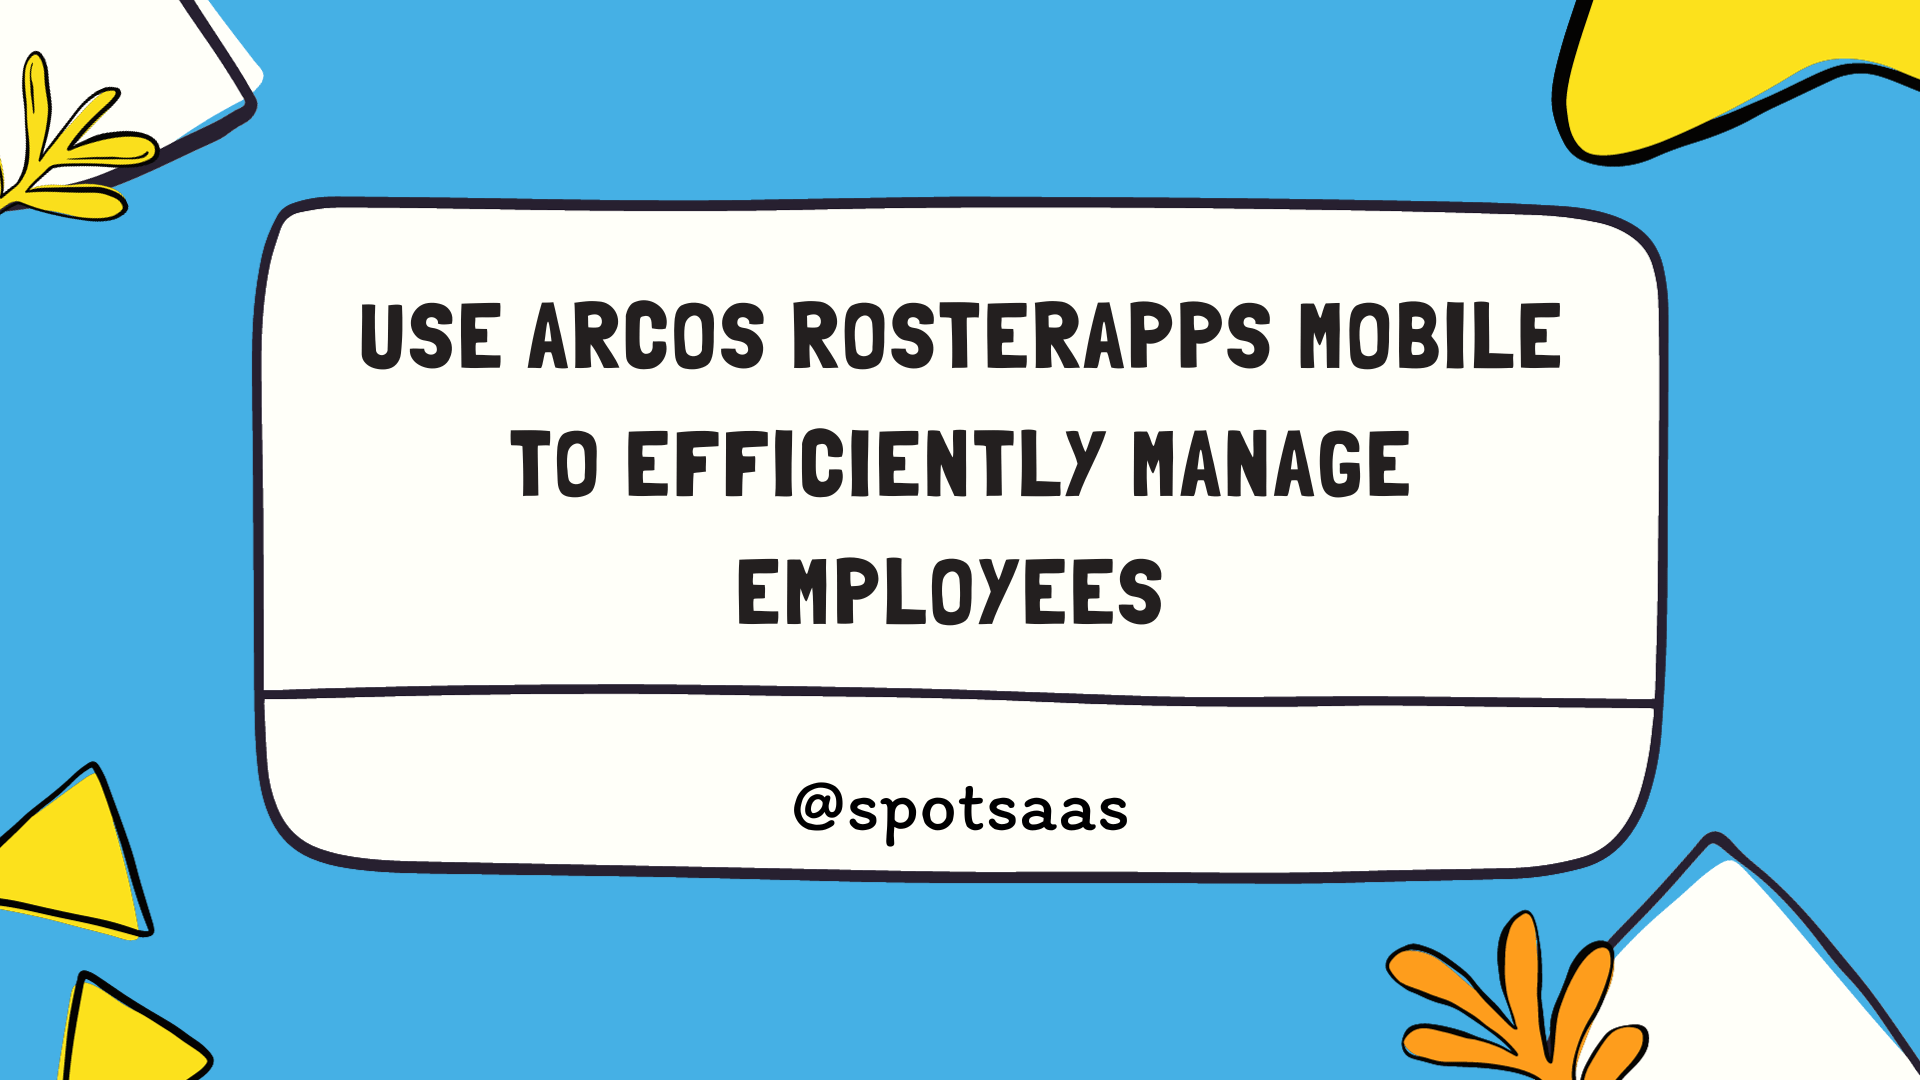 arcos rosterapps